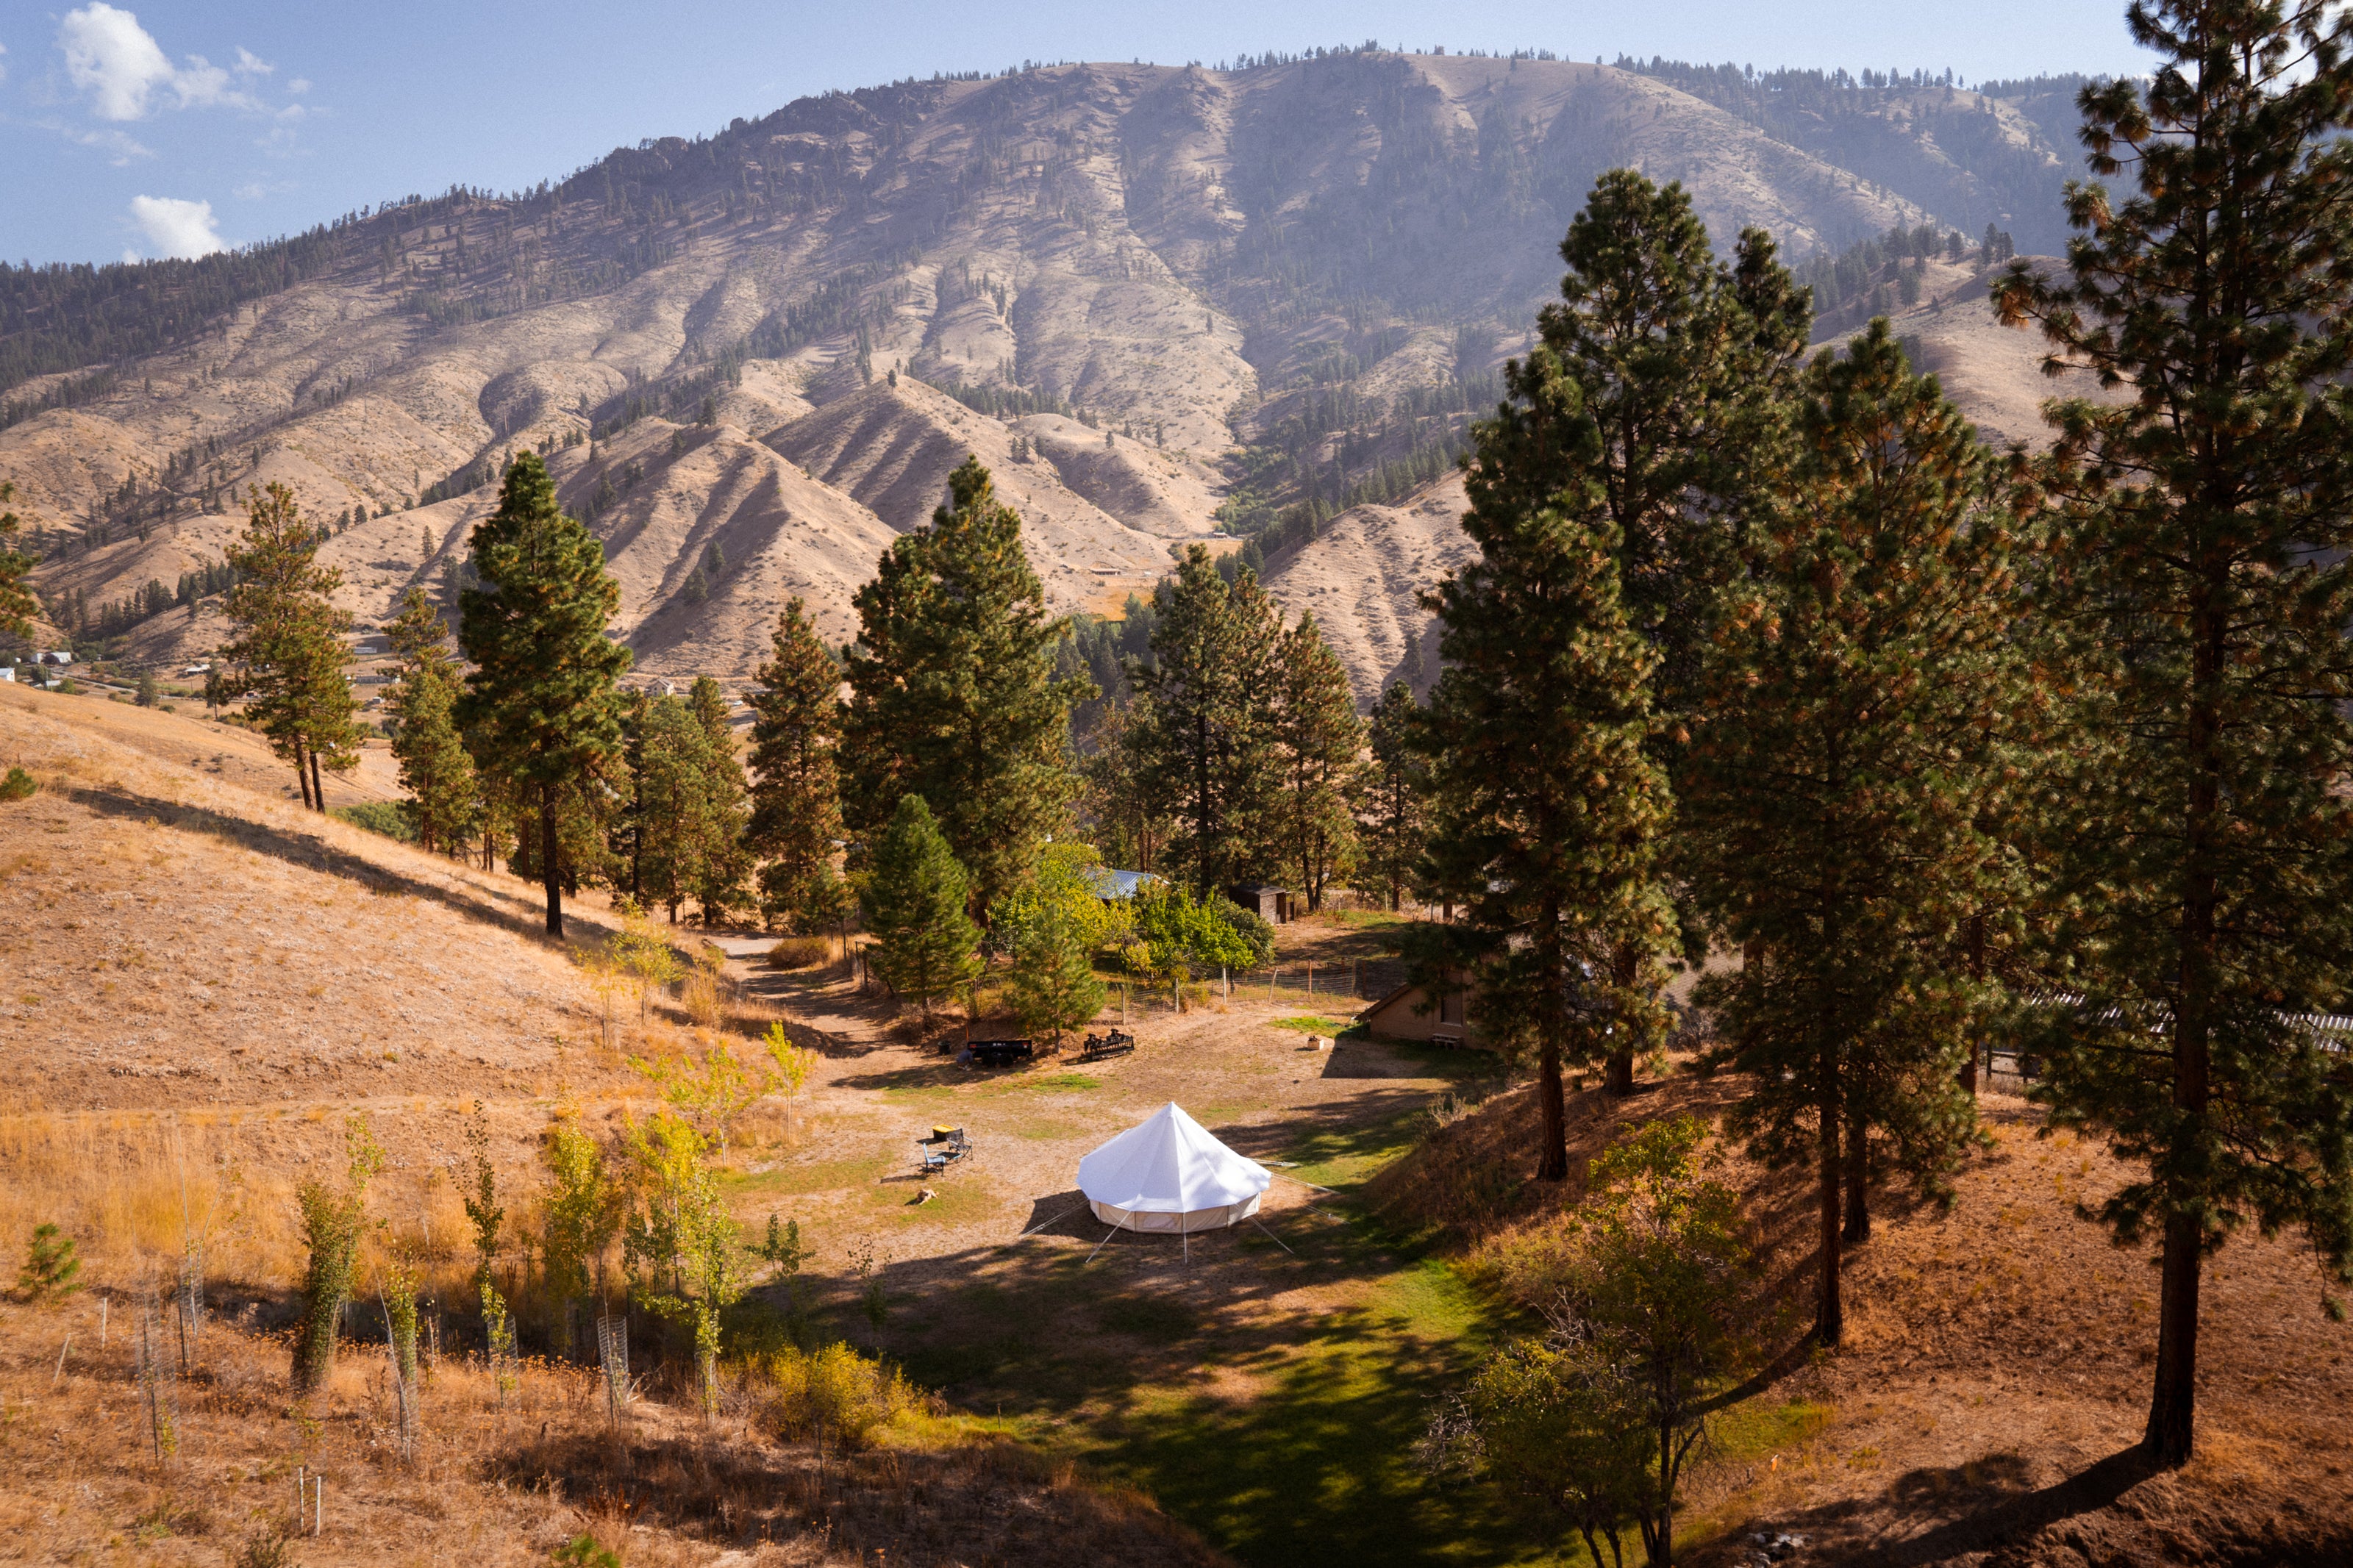 An uphill view looking down into a valley at a white canvas bell tent beneath ponderosa pines and a backdrop of golden foothills and blue sky. 